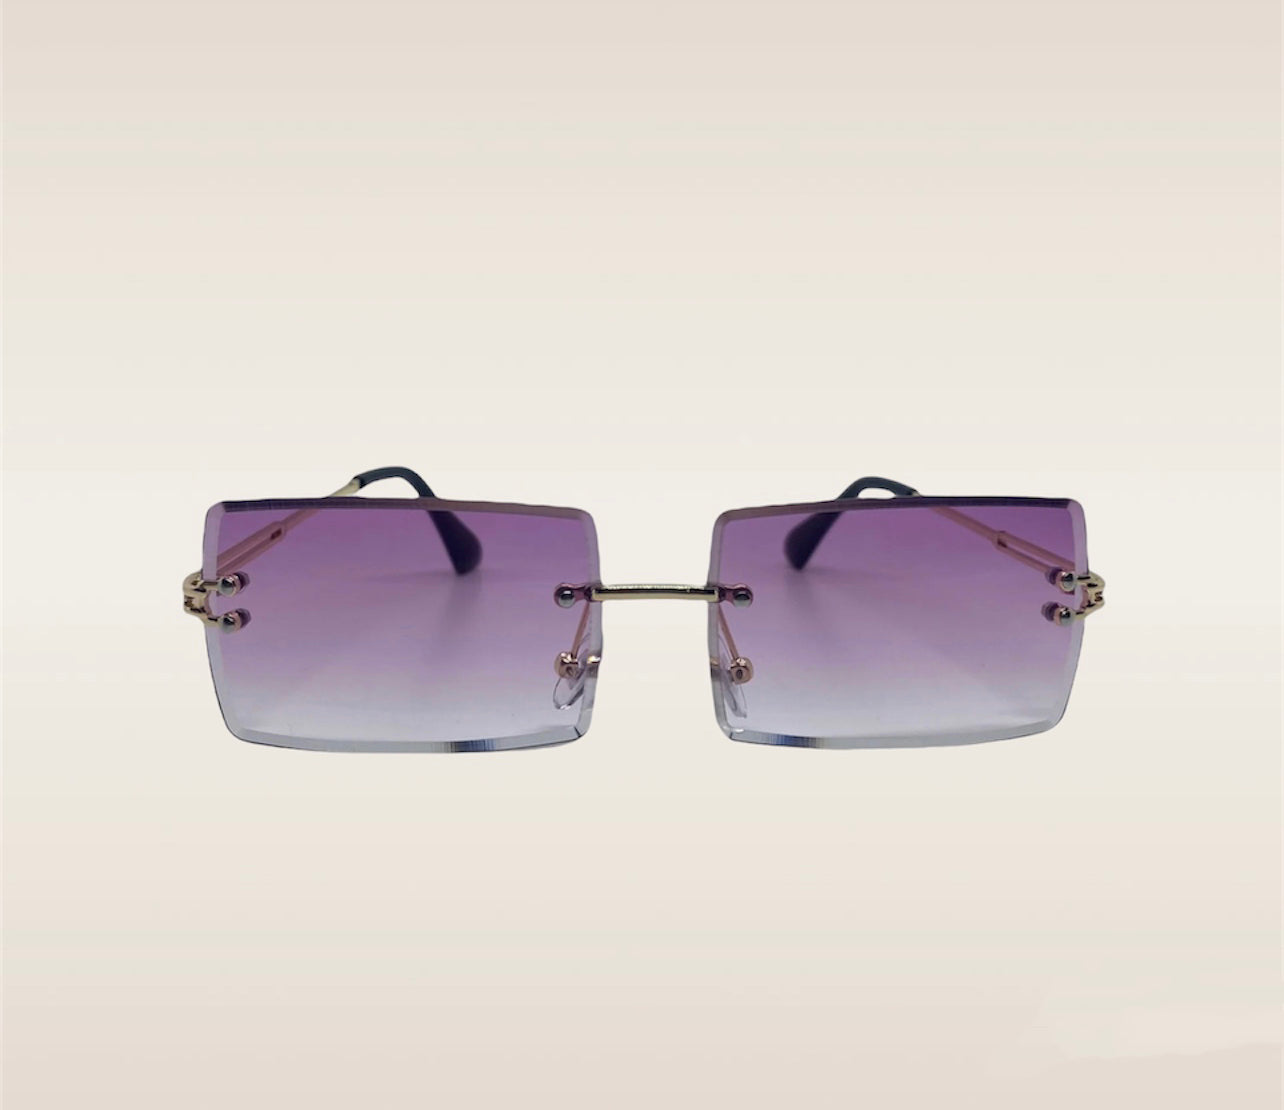 Looking for a modern and stylish pair of glasses? Check out our rectangle rimless frames! Made with high-quality materials, these frames are durable and comfortable to wear. Their sleek and minimalist design complements any outfit, while the rimless style adds a touch of sophistication to your look. The rectangular shape of the frames is flattering on most face shapes, and the absence of rims allows for a more unobstructed view. Whether you need glasses for everyday wear or just for reading, our rectangle rimless frames are the perfect choice. Shop now and discover the perfect blend of style and function with our trendy glasses frames!